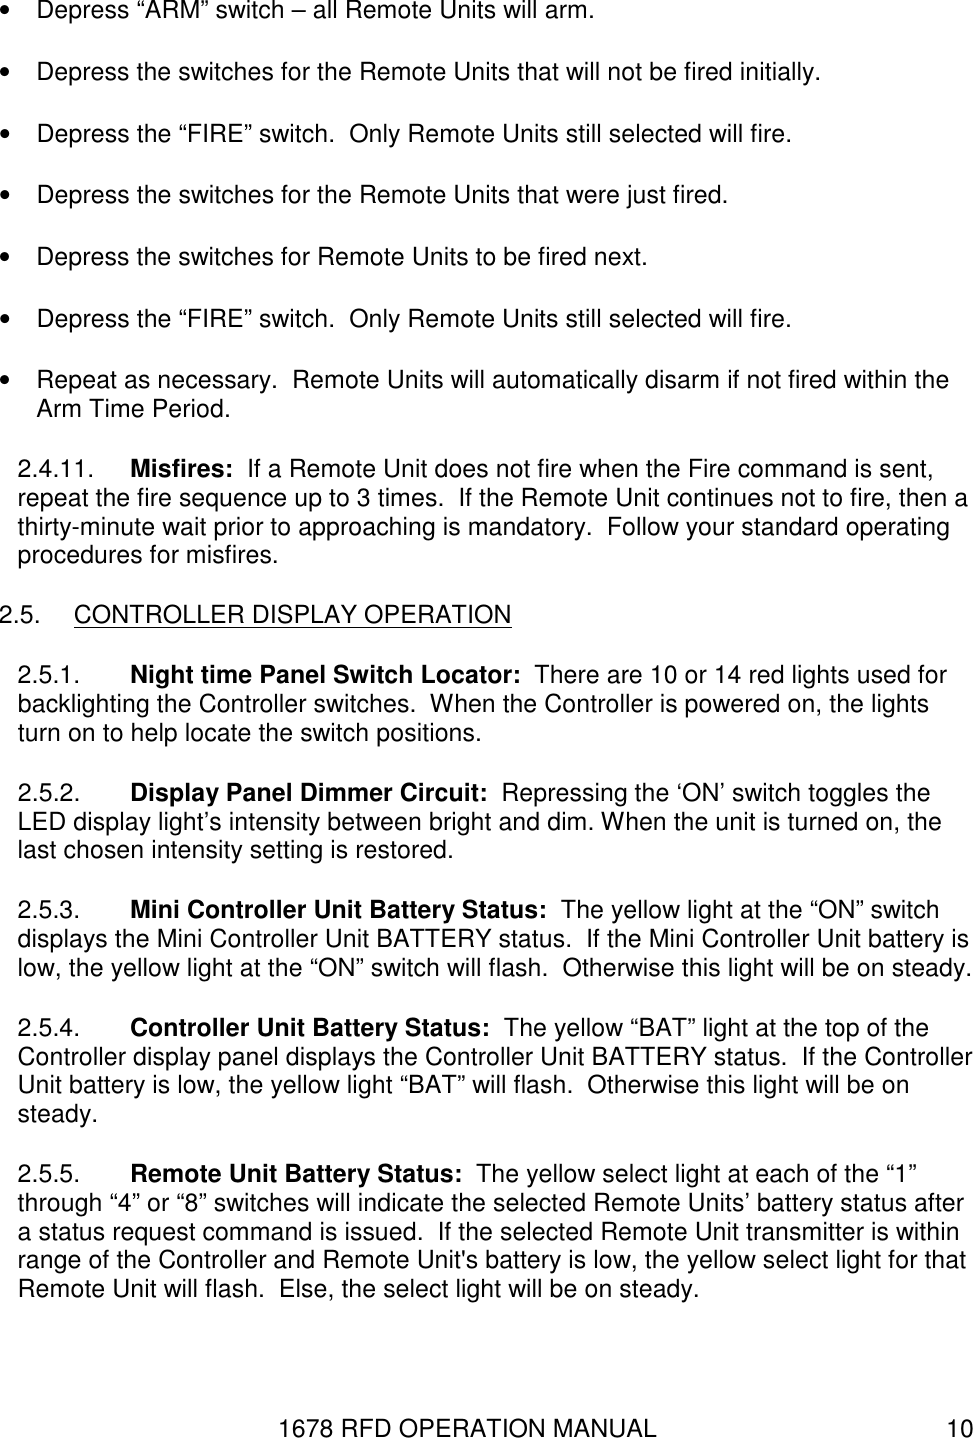 1678 RFD OPERATION MANUAL  10 •  Depress “ARM” switch – all Remote Units will arm. •  Depress the switches for the Remote Units that will not be fired initially. •  Depress the “FIRE” switch.  Only Remote Units still selected will fire. •  Depress the switches for the Remote Units that were just fired. •  Depress the switches for Remote Units to be fired next. •  Depress the “FIRE” switch.  Only Remote Units still selected will fire. •  Repeat as necessary.  Remote Units will automatically disarm if not fired within the Arm Time Period. 2.4.11.  Misfires:  If a Remote Unit does not fire when the Fire command is sent, repeat the fire sequence up to 3 times.  If the Remote Unit continues not to fire, then a thirty-minute wait prior to approaching is mandatory.  Follow your standard operating procedures for misfires. 2.5.  CONTROLLER DISPLAY OPERATION 2.5.1.  Night time Panel Switch Locator:  There are 10 or 14 red lights used for backlighting the Controller switches.  When the Controller is powered on, the lights turn on to help locate the switch positions. 2.5.2.  Display Panel Dimmer Circuit:  Repressing the ‘ON’ switch toggles the LED display light’s intensity between bright and dim. When the unit is turned on, the last chosen intensity setting is restored. 2.5.3.  Mini Controller Unit Battery Status:  The yellow light at the “ON” switch displays the Mini Controller Unit BATTERY status.  If the Mini Controller Unit battery is low, the yellow light at the “ON” switch will flash.  Otherwise this light will be on steady. 2.5.4.  Controller Unit Battery Status:  The yellow “BAT” light at the top of the Controller display panel displays the Controller Unit BATTERY status.  If the Controller Unit battery is low, the yellow light “BAT” will flash.  Otherwise this light will be on steady. 2.5.5.  Remote Unit Battery Status:  The yellow select light at each of the “1” through “4” or “8” switches will indicate the selected Remote Units’ battery status after a status request command is issued.  If the selected Remote Unit transmitter is within range of the Controller and Remote Unit&apos;s battery is low, the yellow select light for that Remote Unit will flash.  Else, the select light will be on steady. 